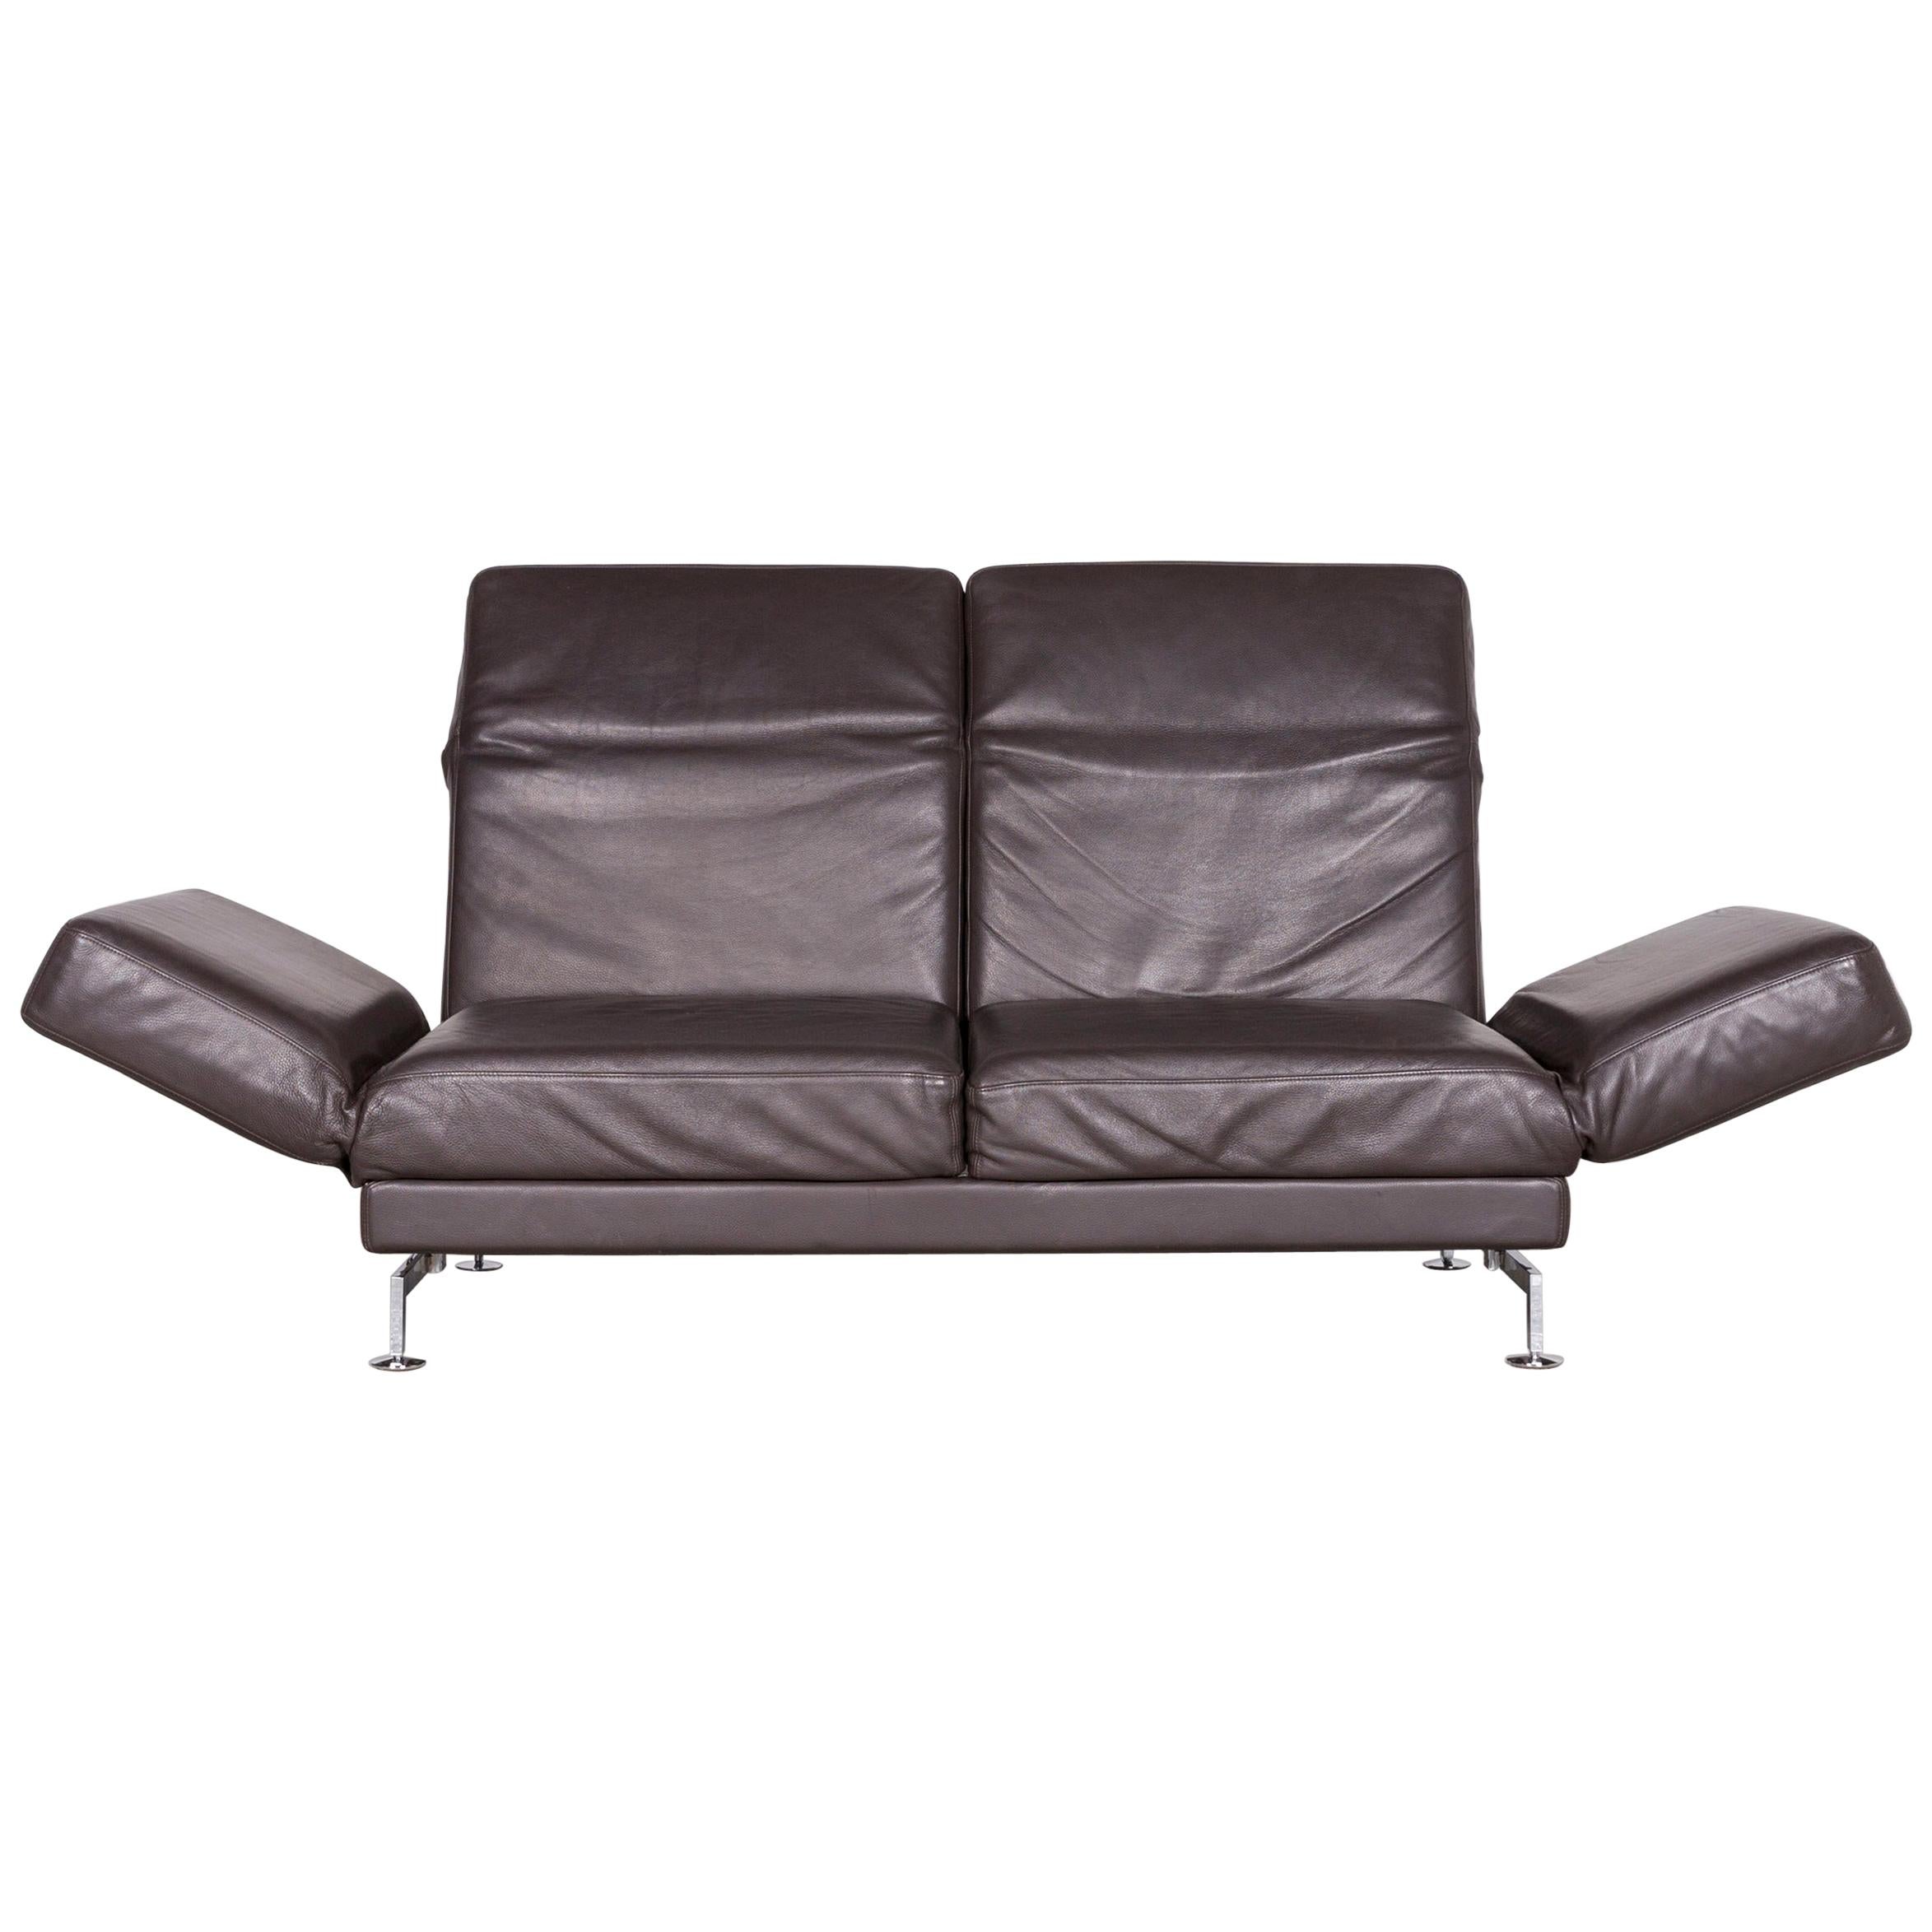 Brühl & Sippold Moule Designer Leather Sofa Brown Two-Seat Couch with Function For Sale